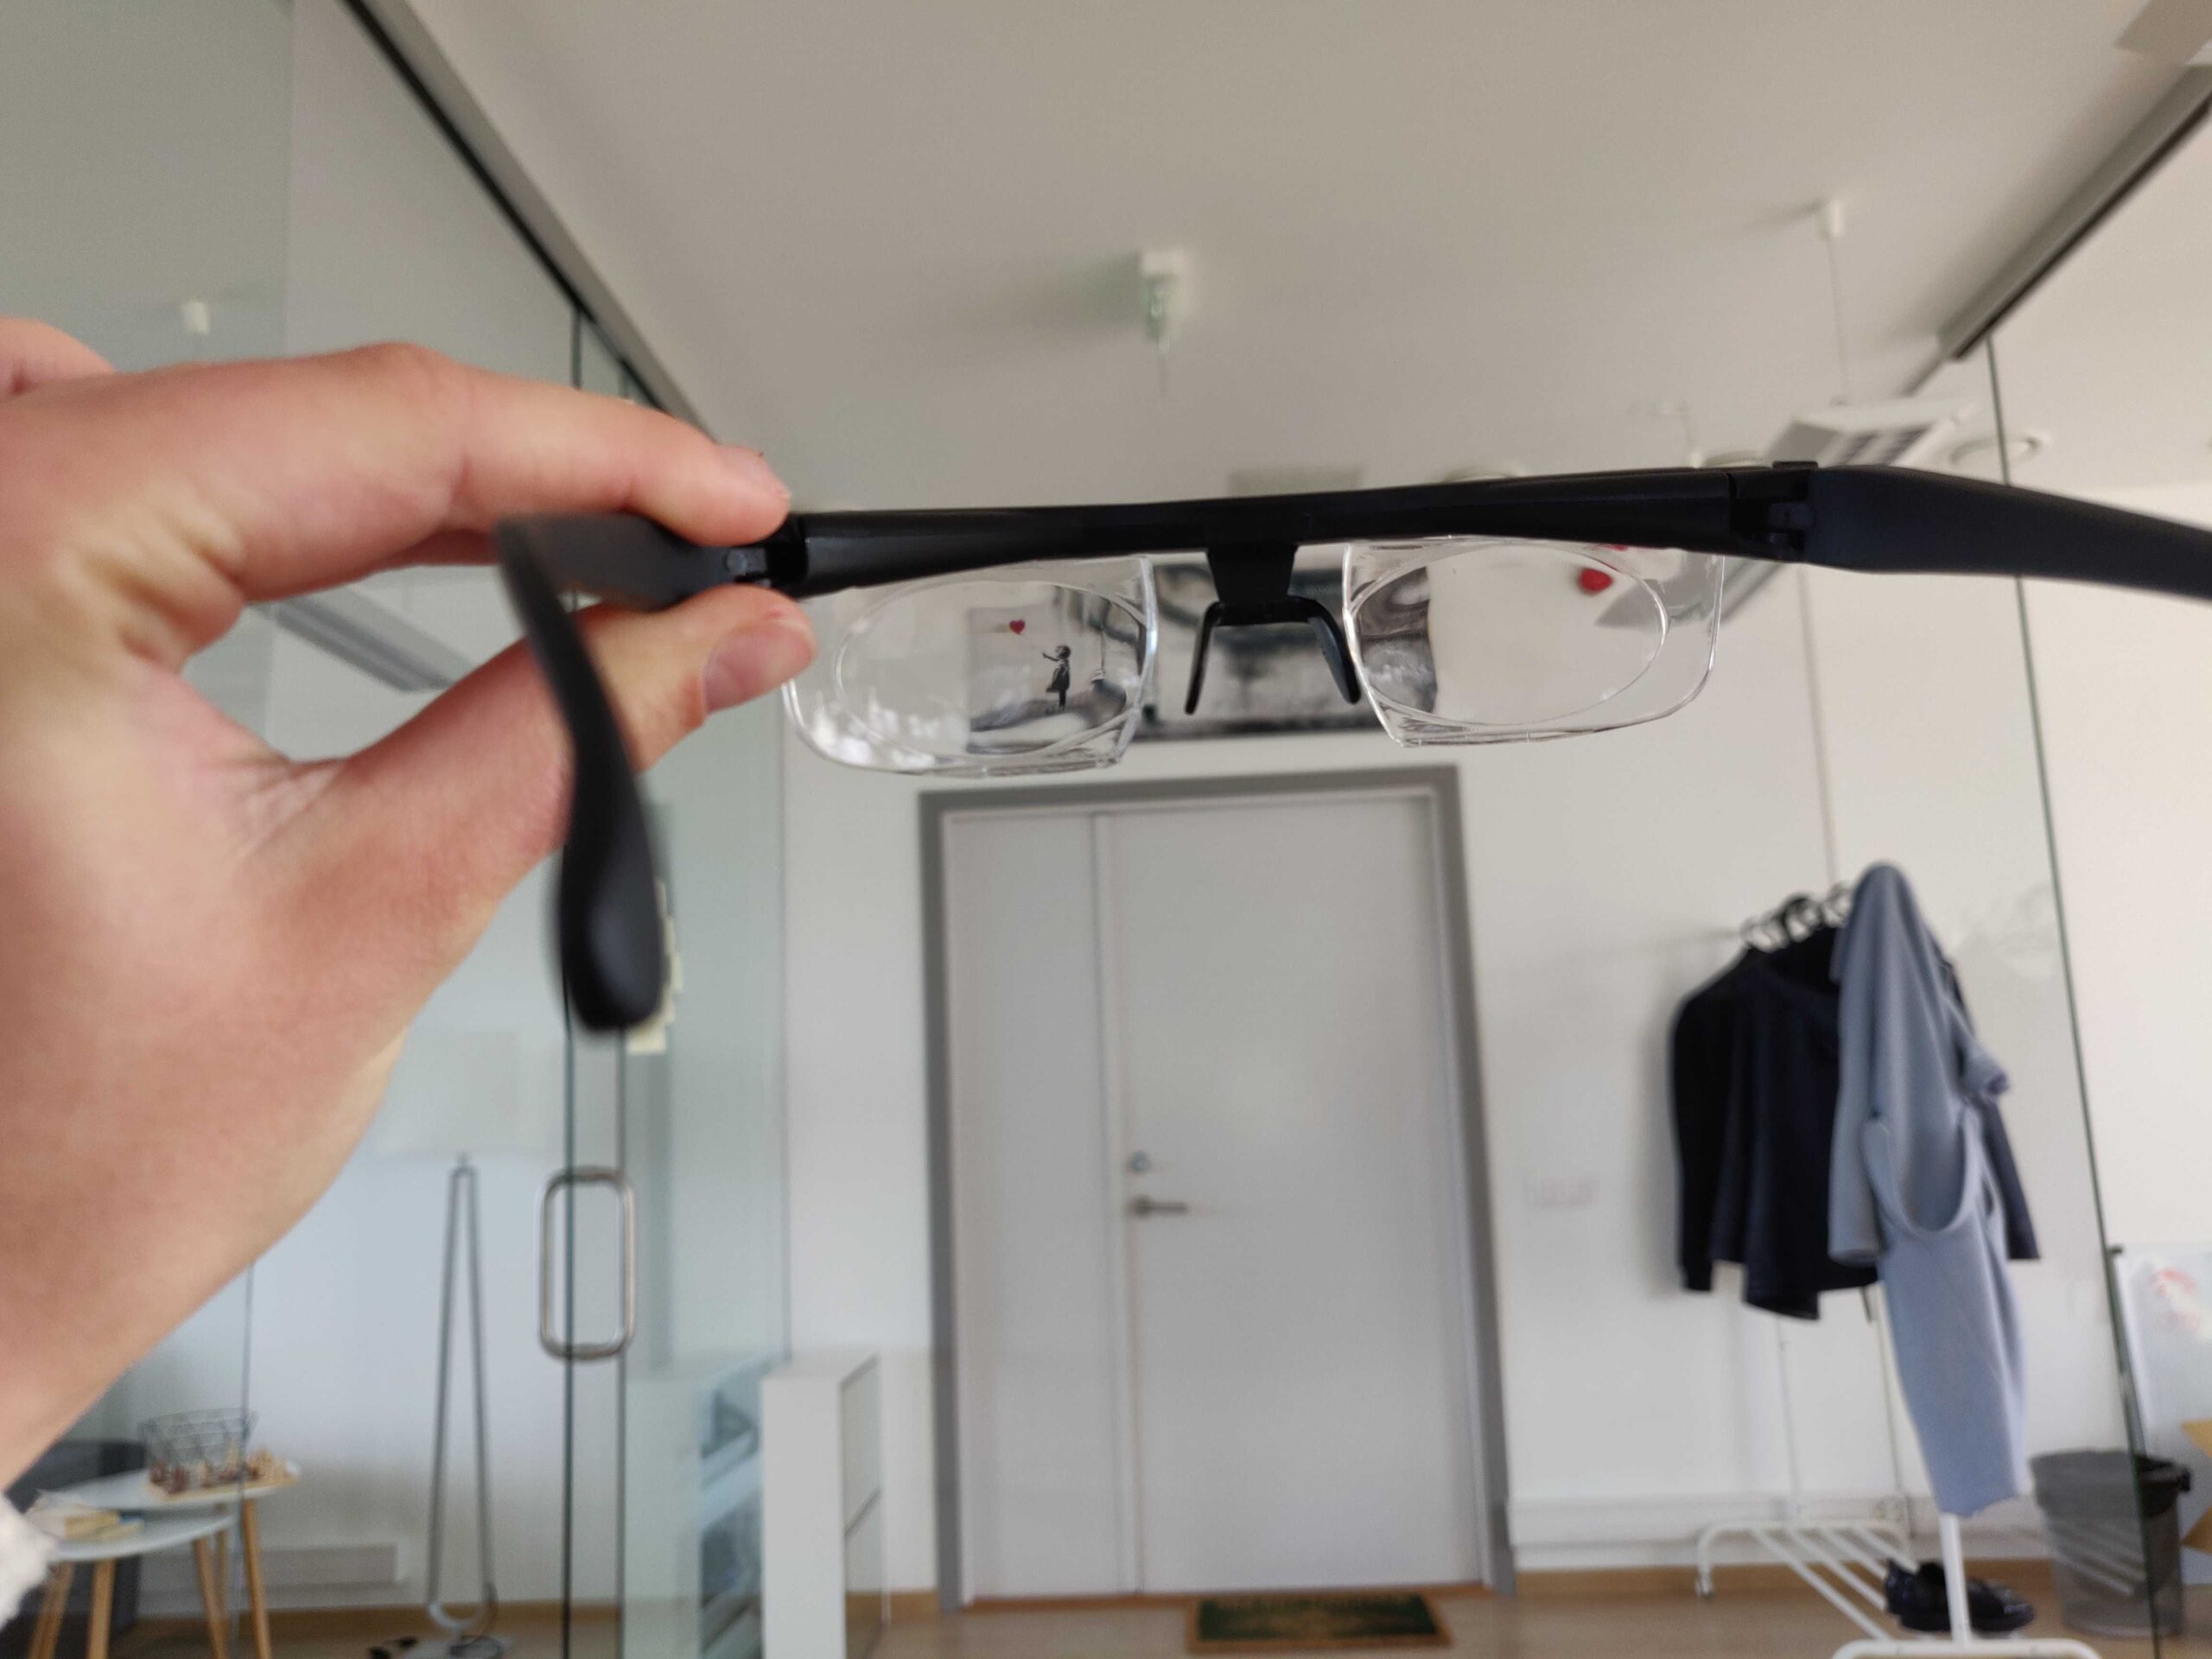 Proper Focus Adjustable Glasses Review 2021 - Read Before Buying